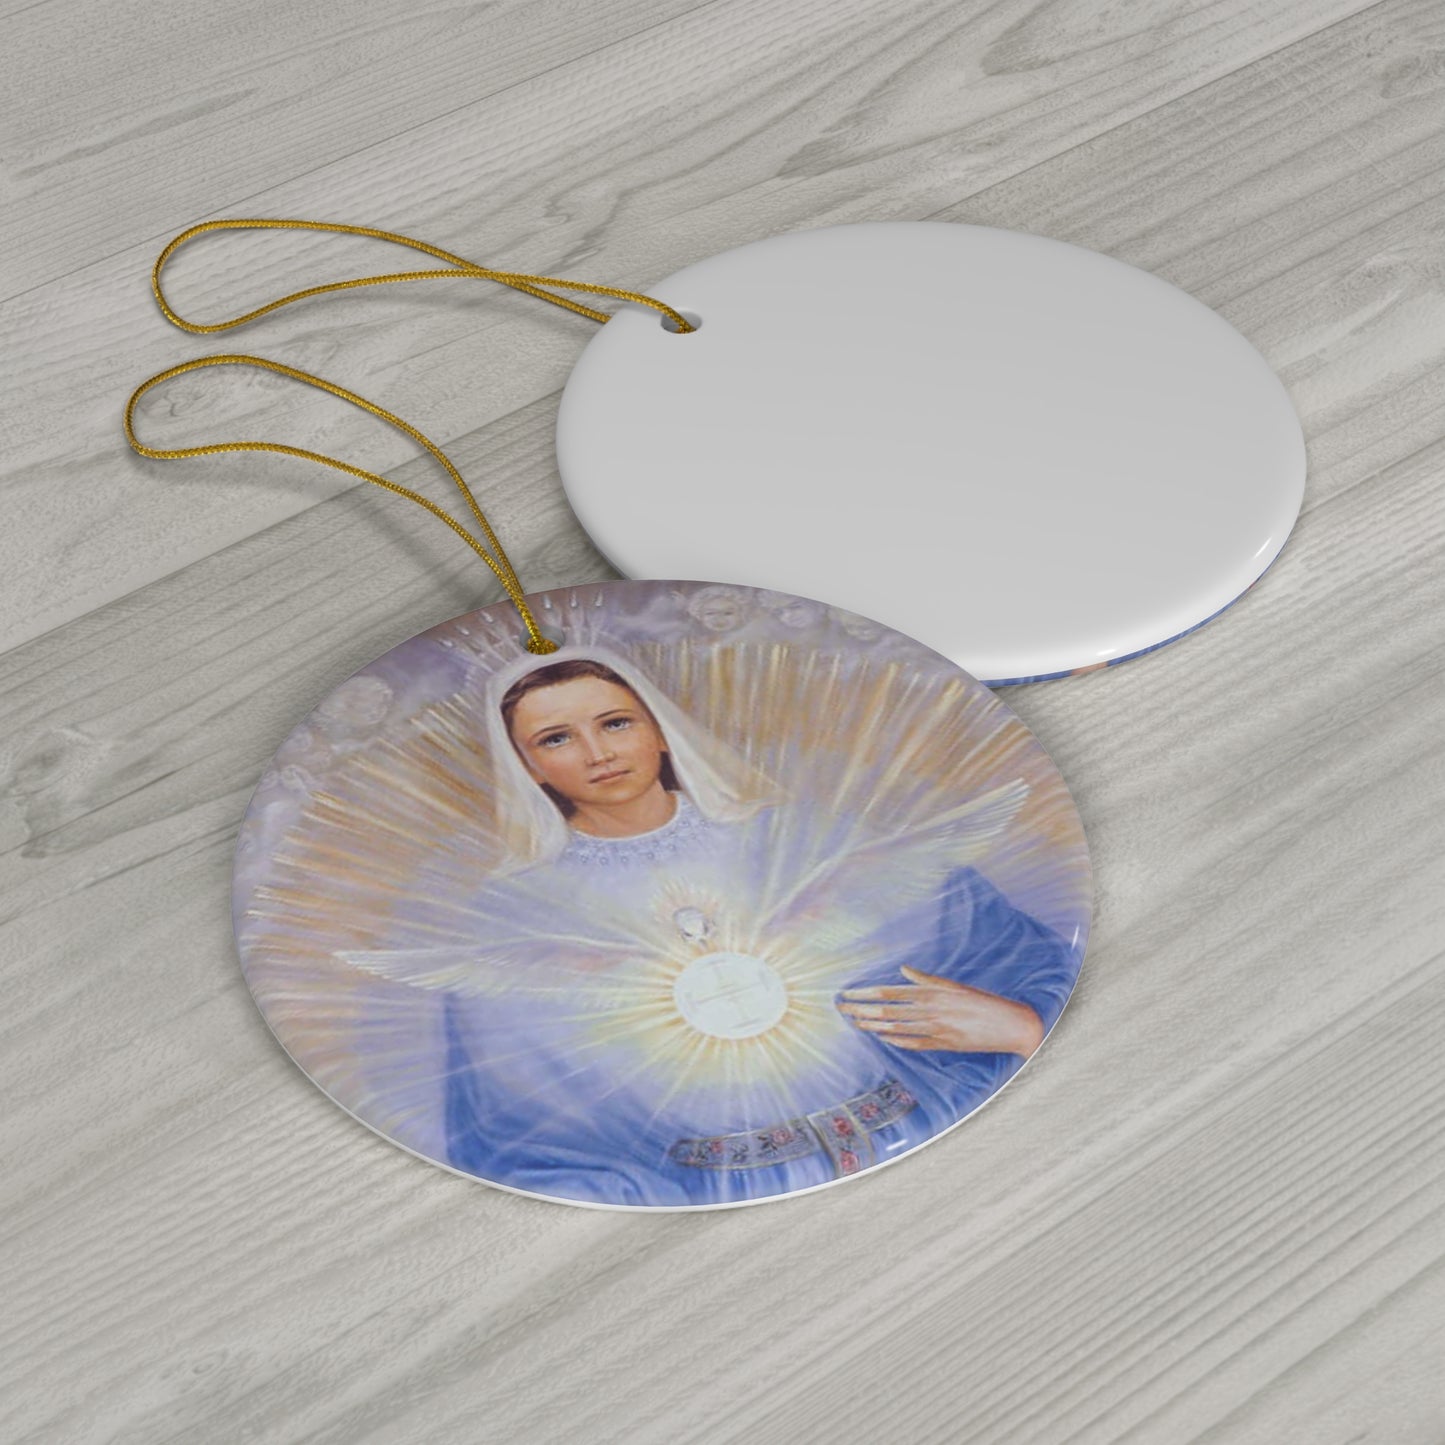 Catholic Christmas Ornament: Mary Mother of the Eucharist, Christmas Gift, Religious Ornament, Ceramic Ornament